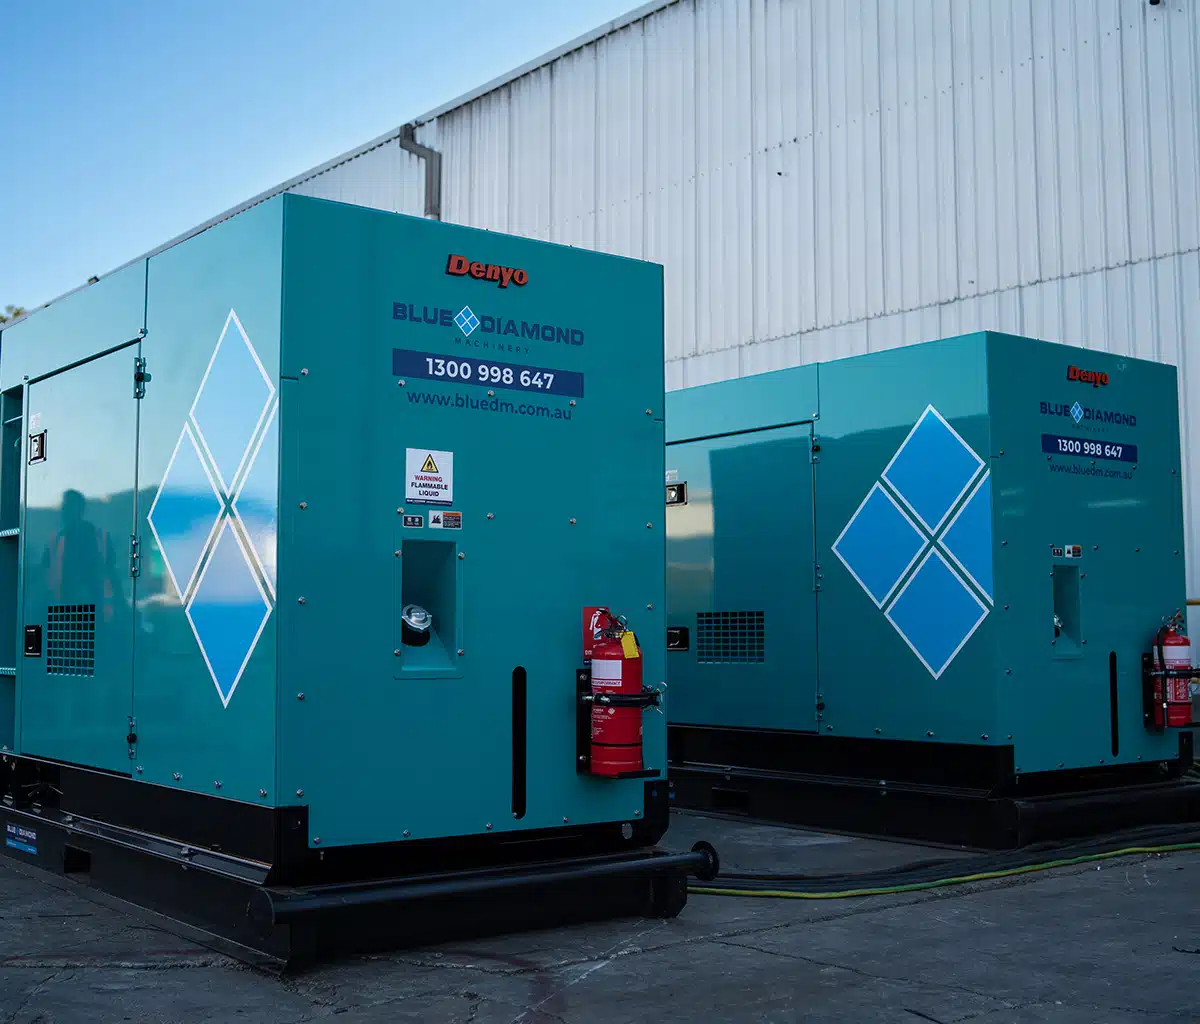 Two Denyo diesel generators standing side by side from Blue Diamond Machinery.